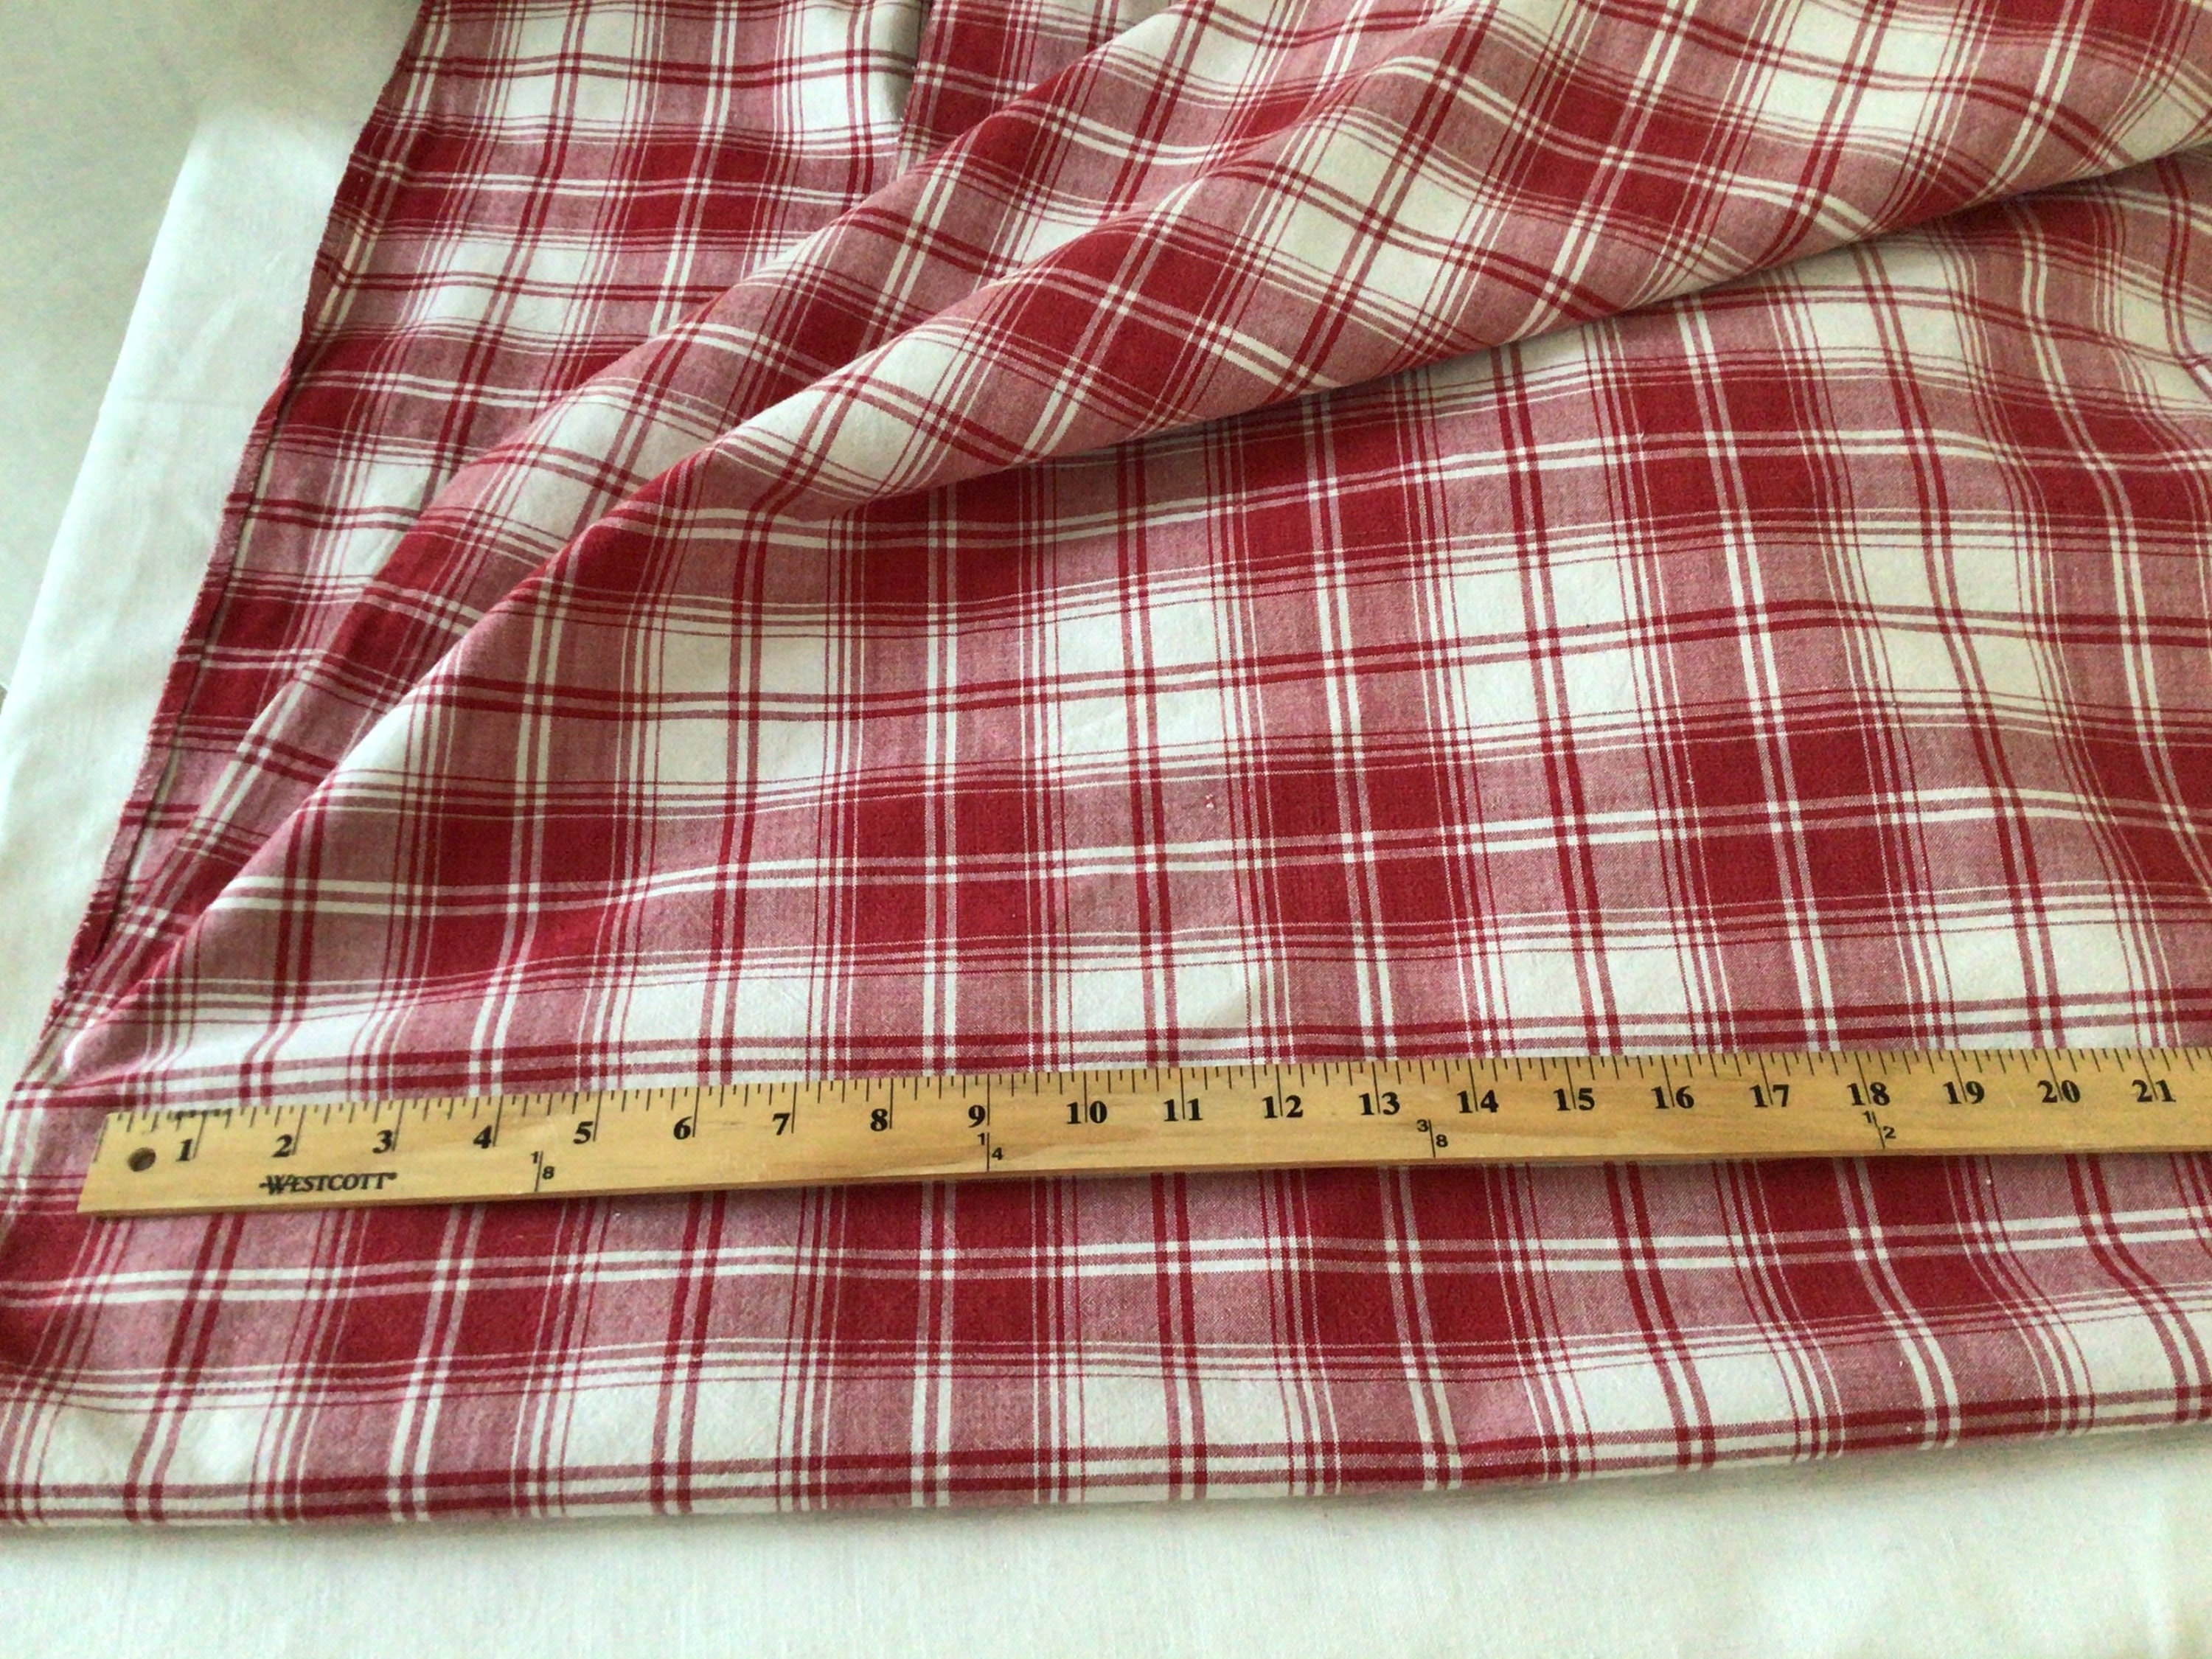 Antique French Red /White Plaid Cotton/ Linen Fabric | Etsy